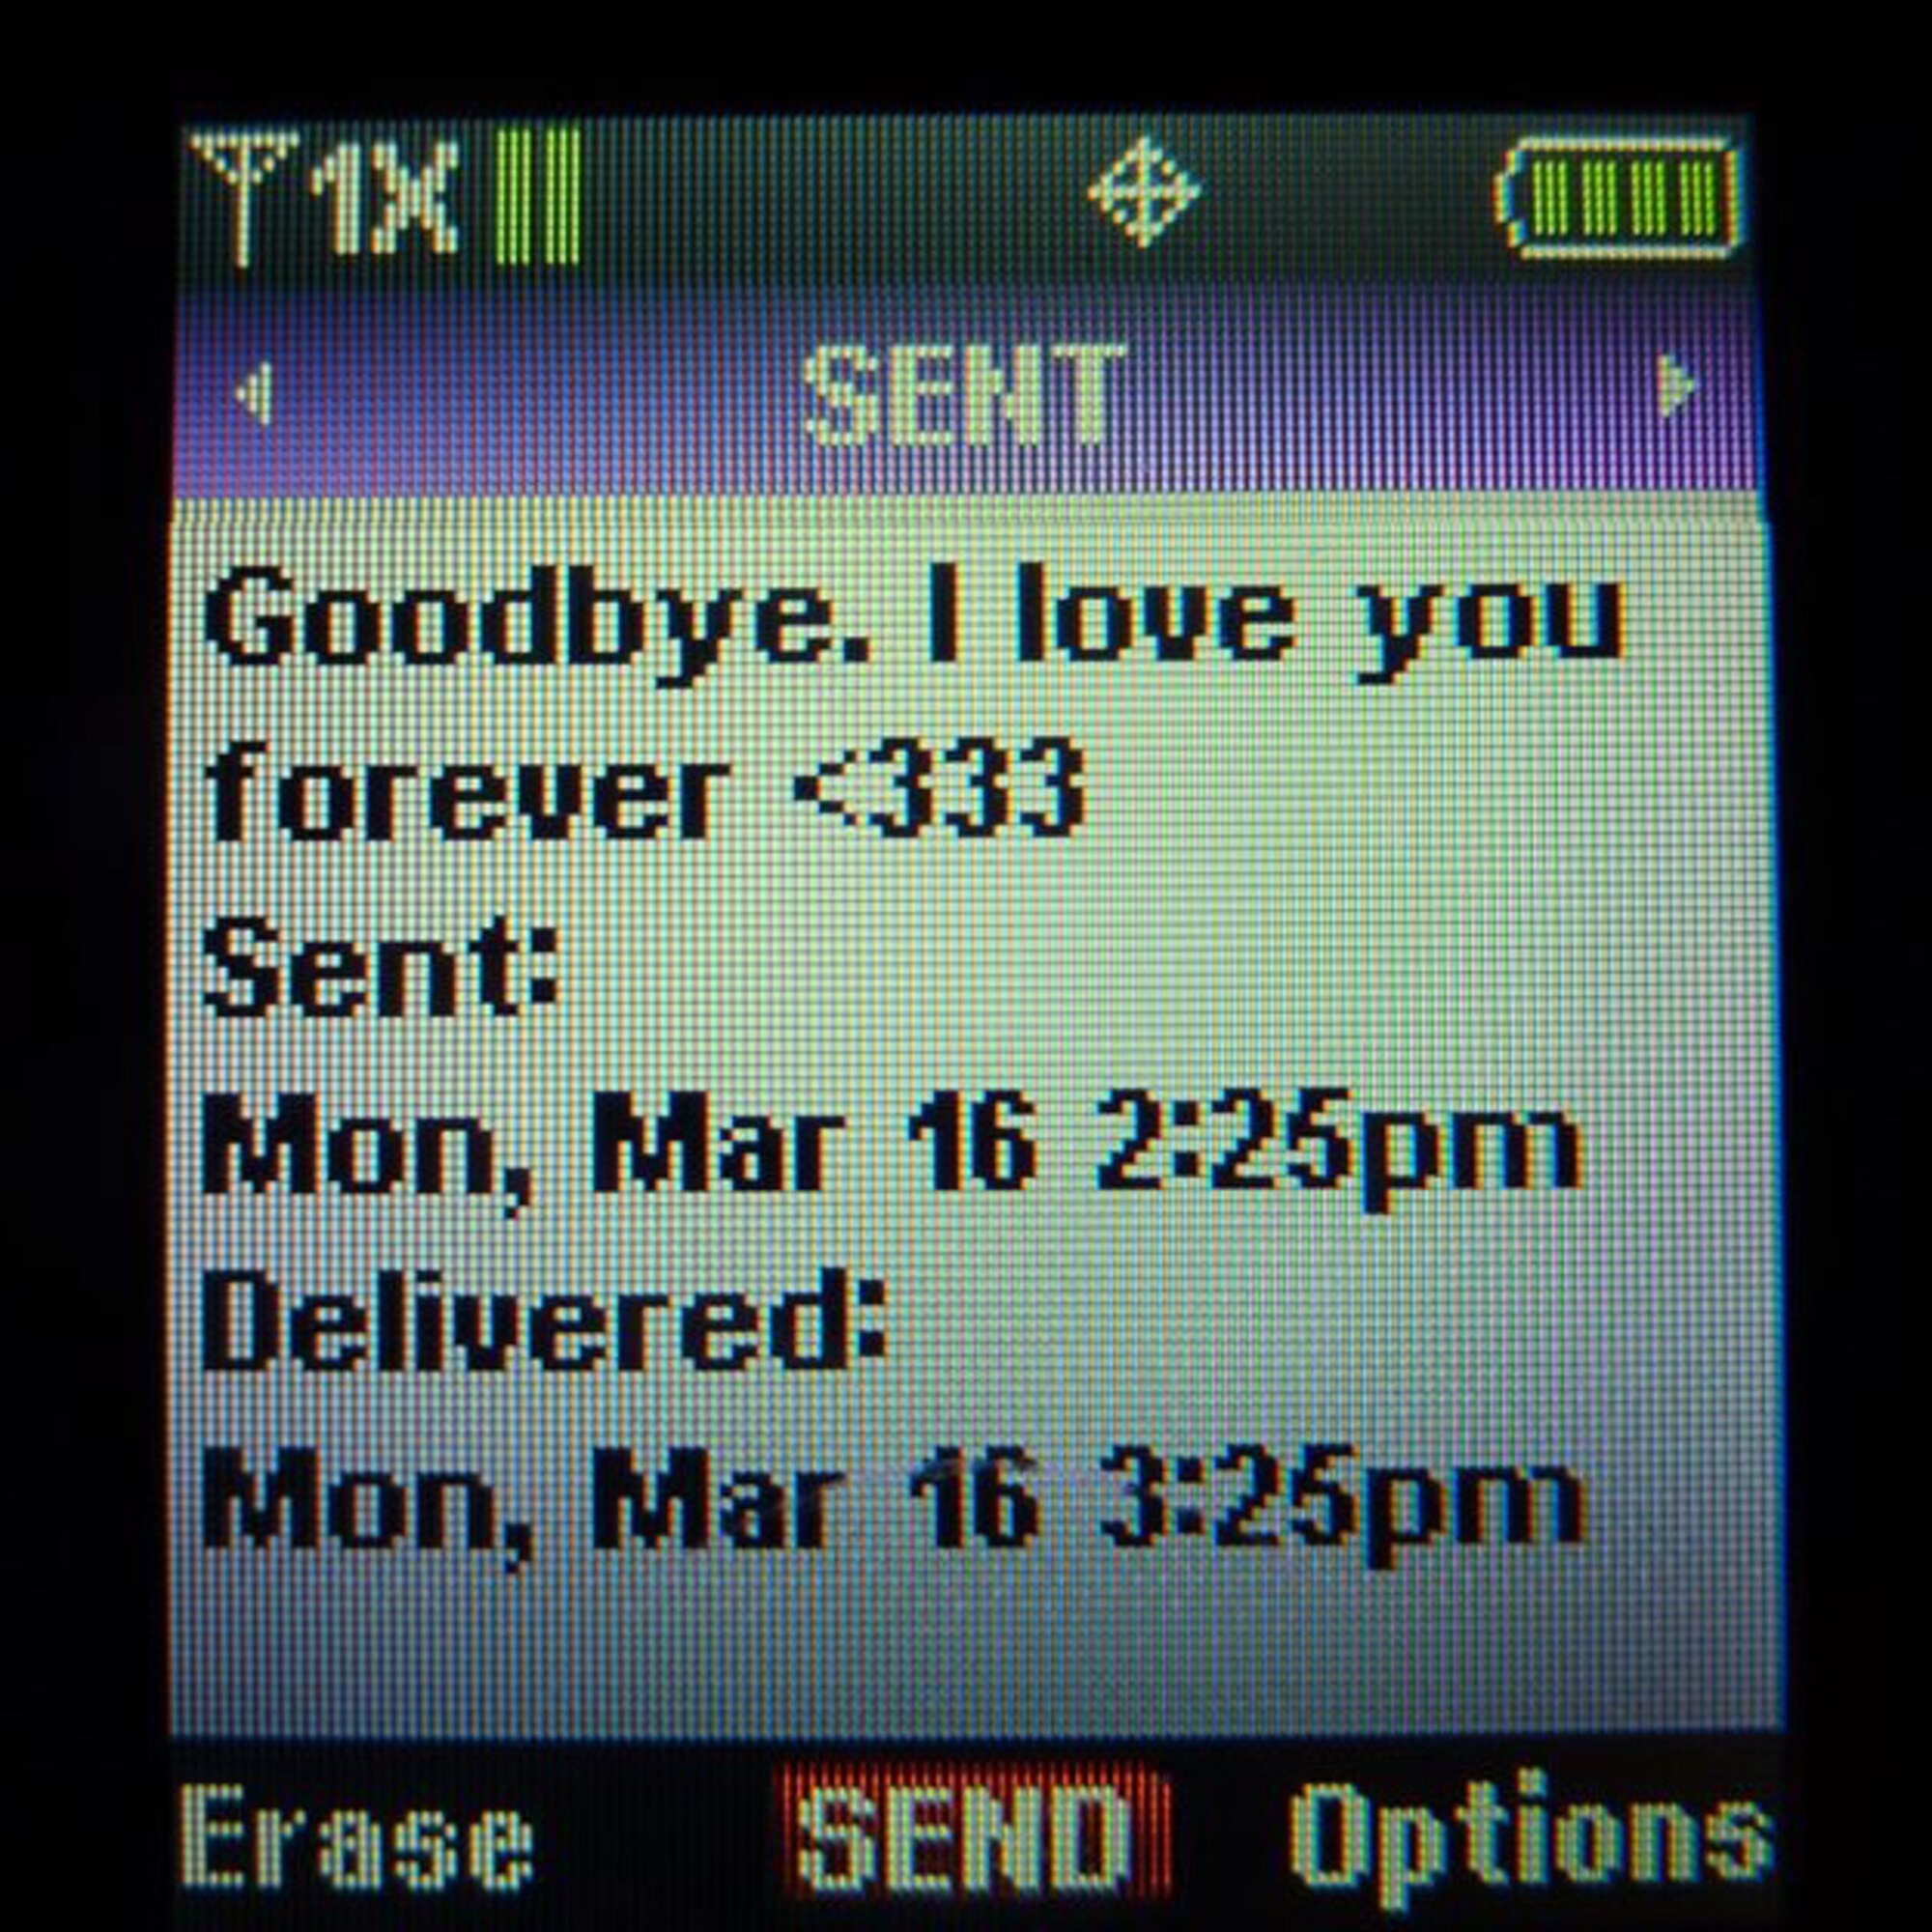 The last text sent out from Chelsea Rae Bowen was to her boyfriend.